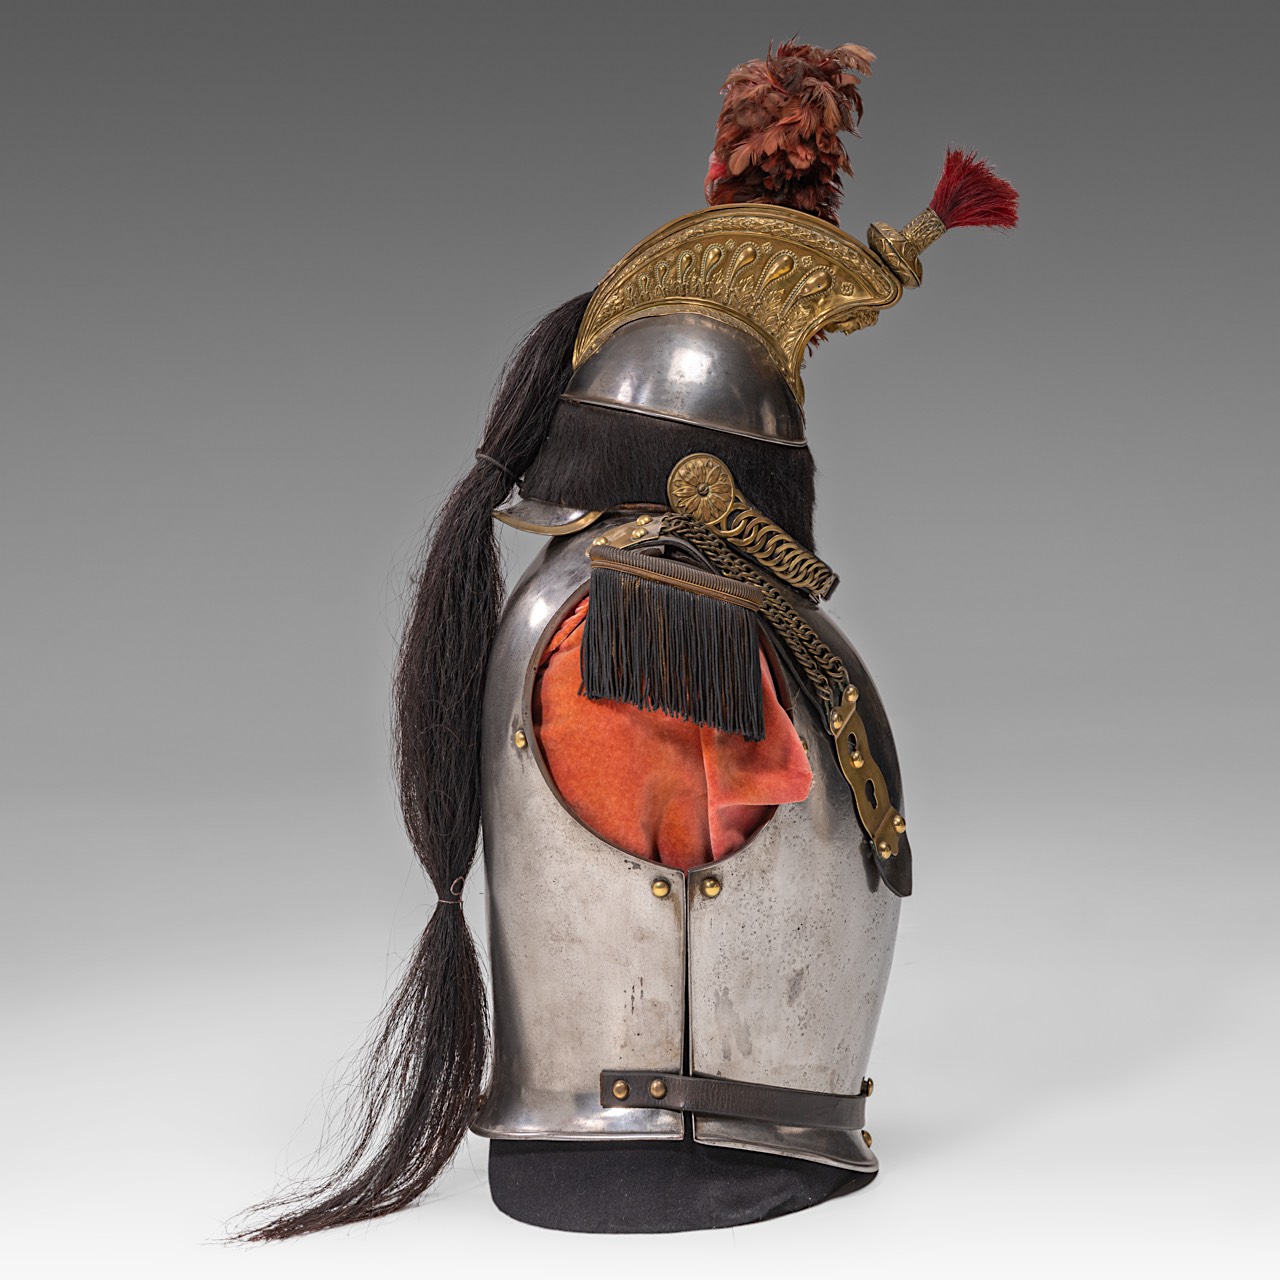 Cuirass and helmet ,metal and guilded brass, 1855, 88 x 42 x 54 cm. (34.6 x 16.5 x 21.2 in.) - Image 5 of 6